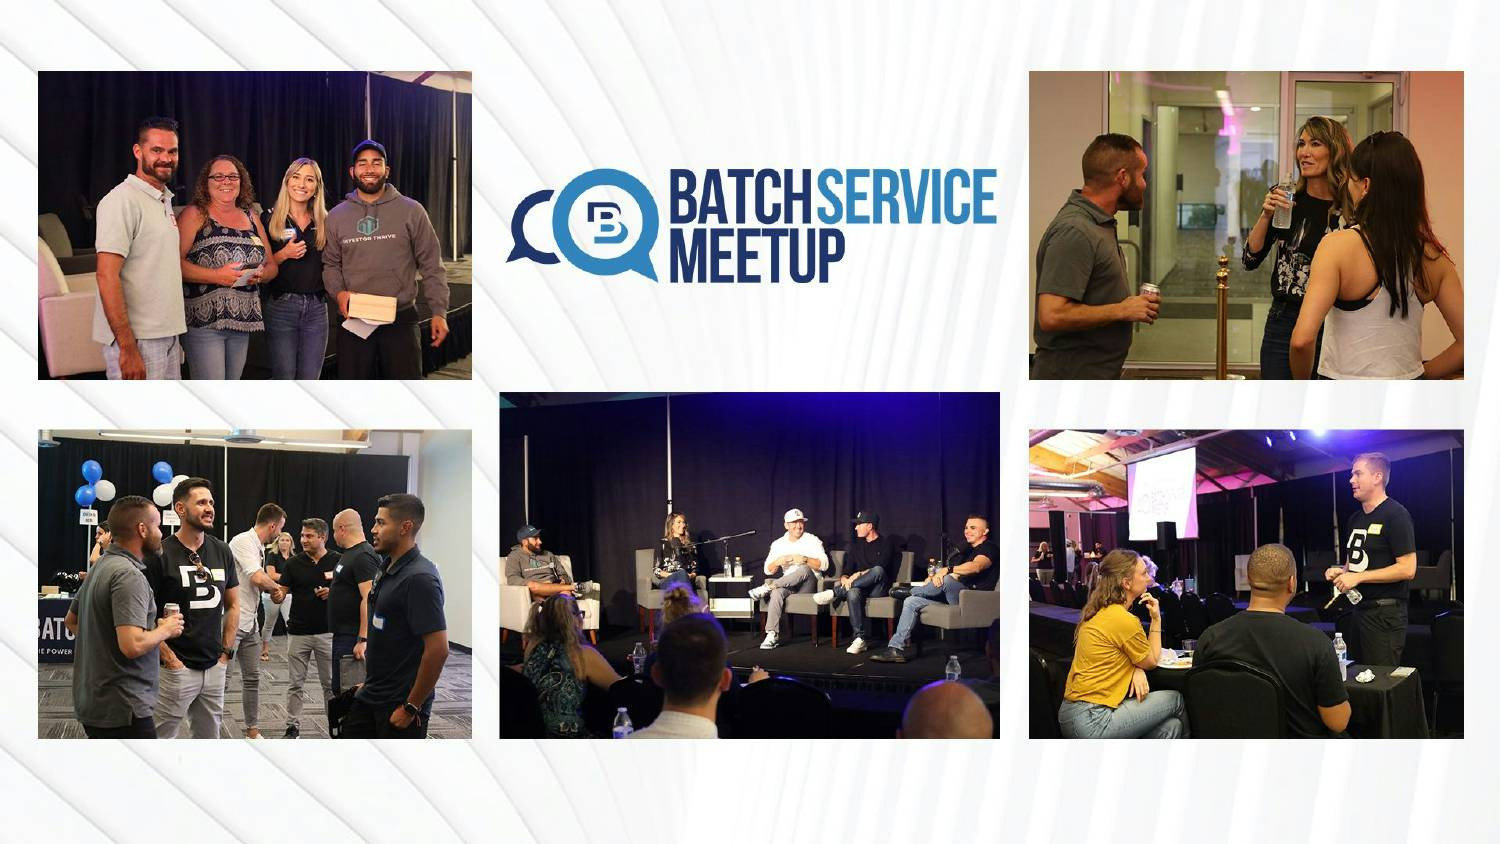 Our BatchService Meetup gives customers a chance to connect with fellow investors and our outstanding team.